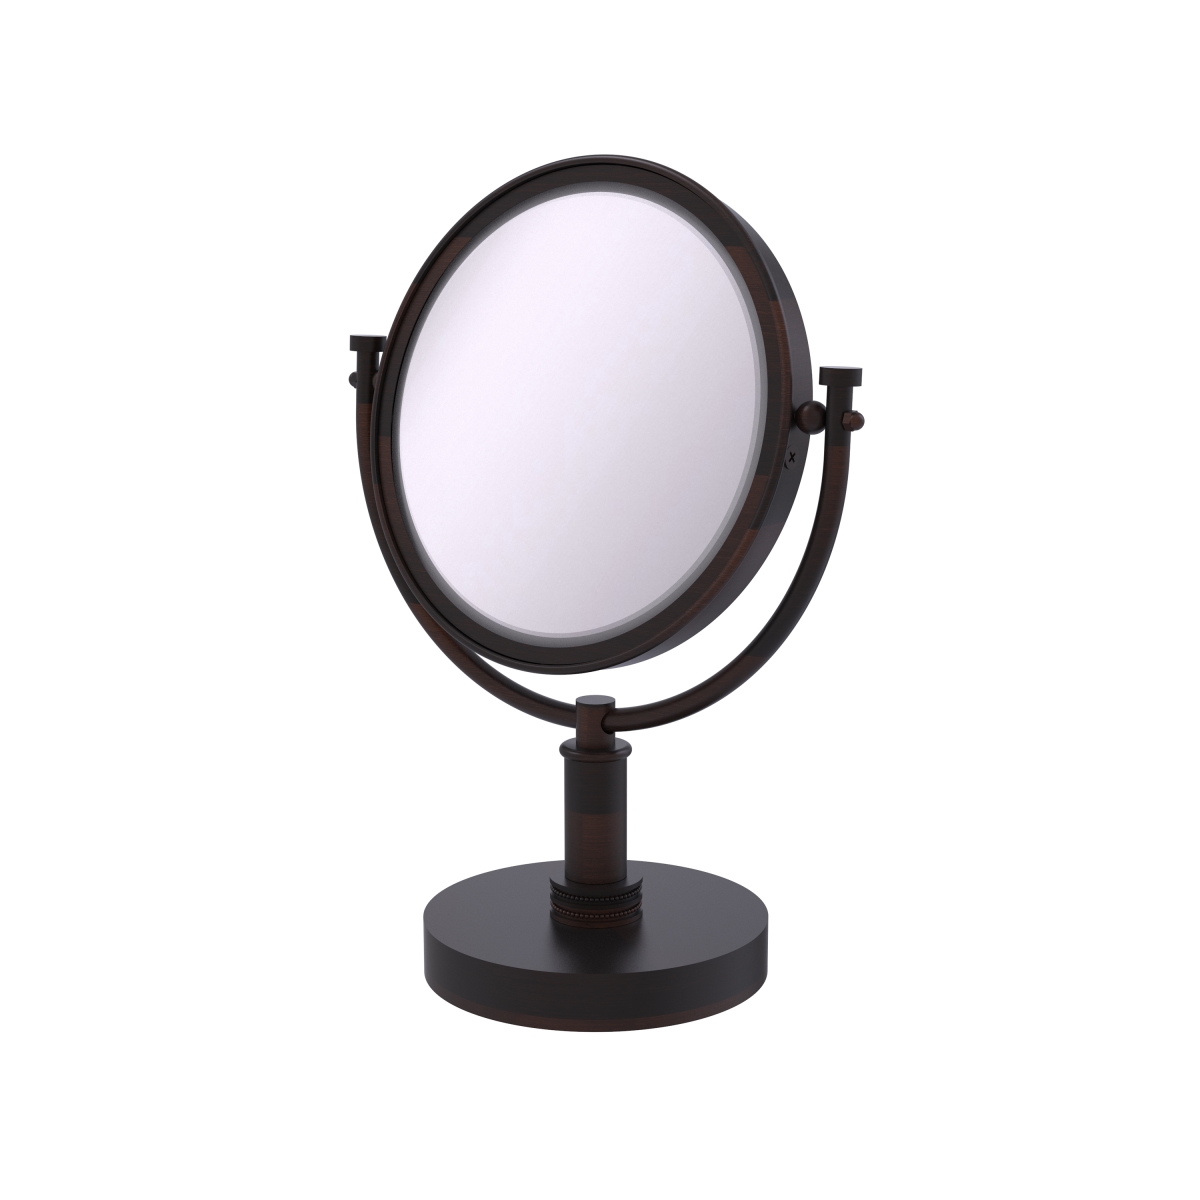 Picture of Allied Brass DM-4D-3X-VB 8 in. Vanity Top Make-Up Mirror 3X Magnification, Venetian Bronze - 15 x 8 x 8 in.